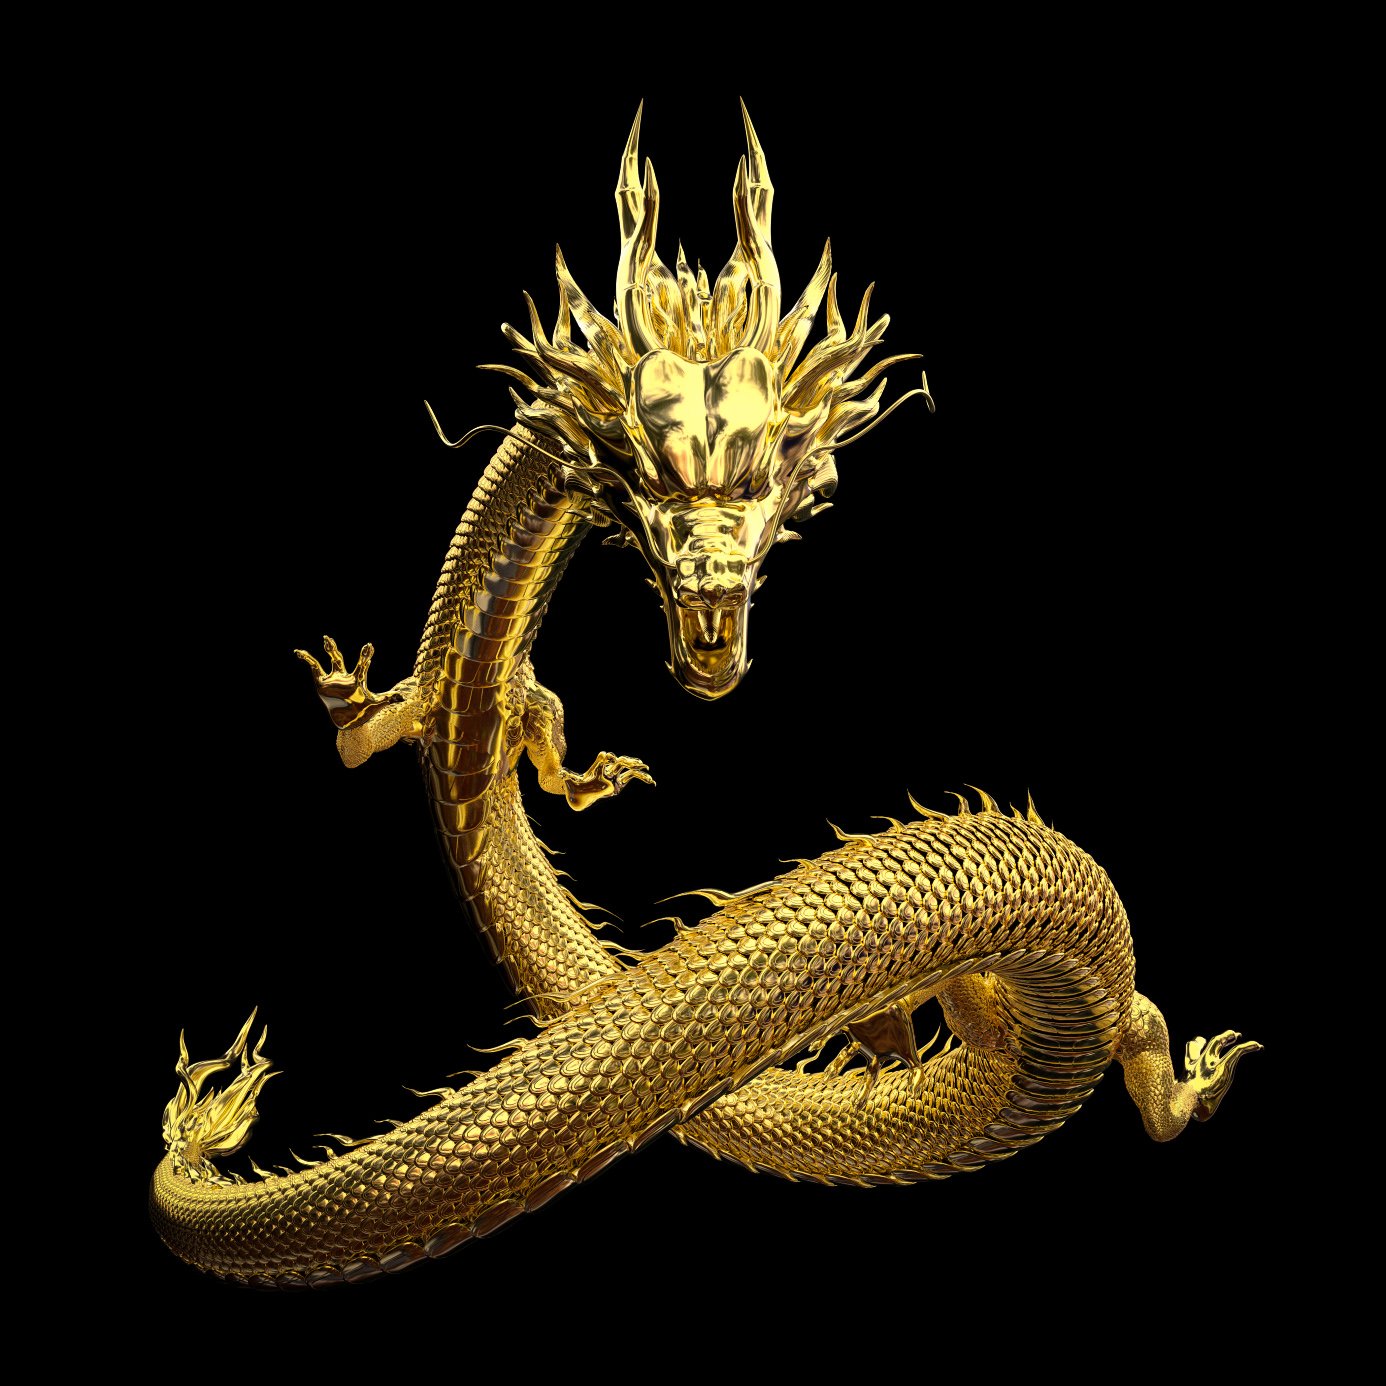 The Chinese dragon, also known as lung, is a legendary creature in Chinese mythology.